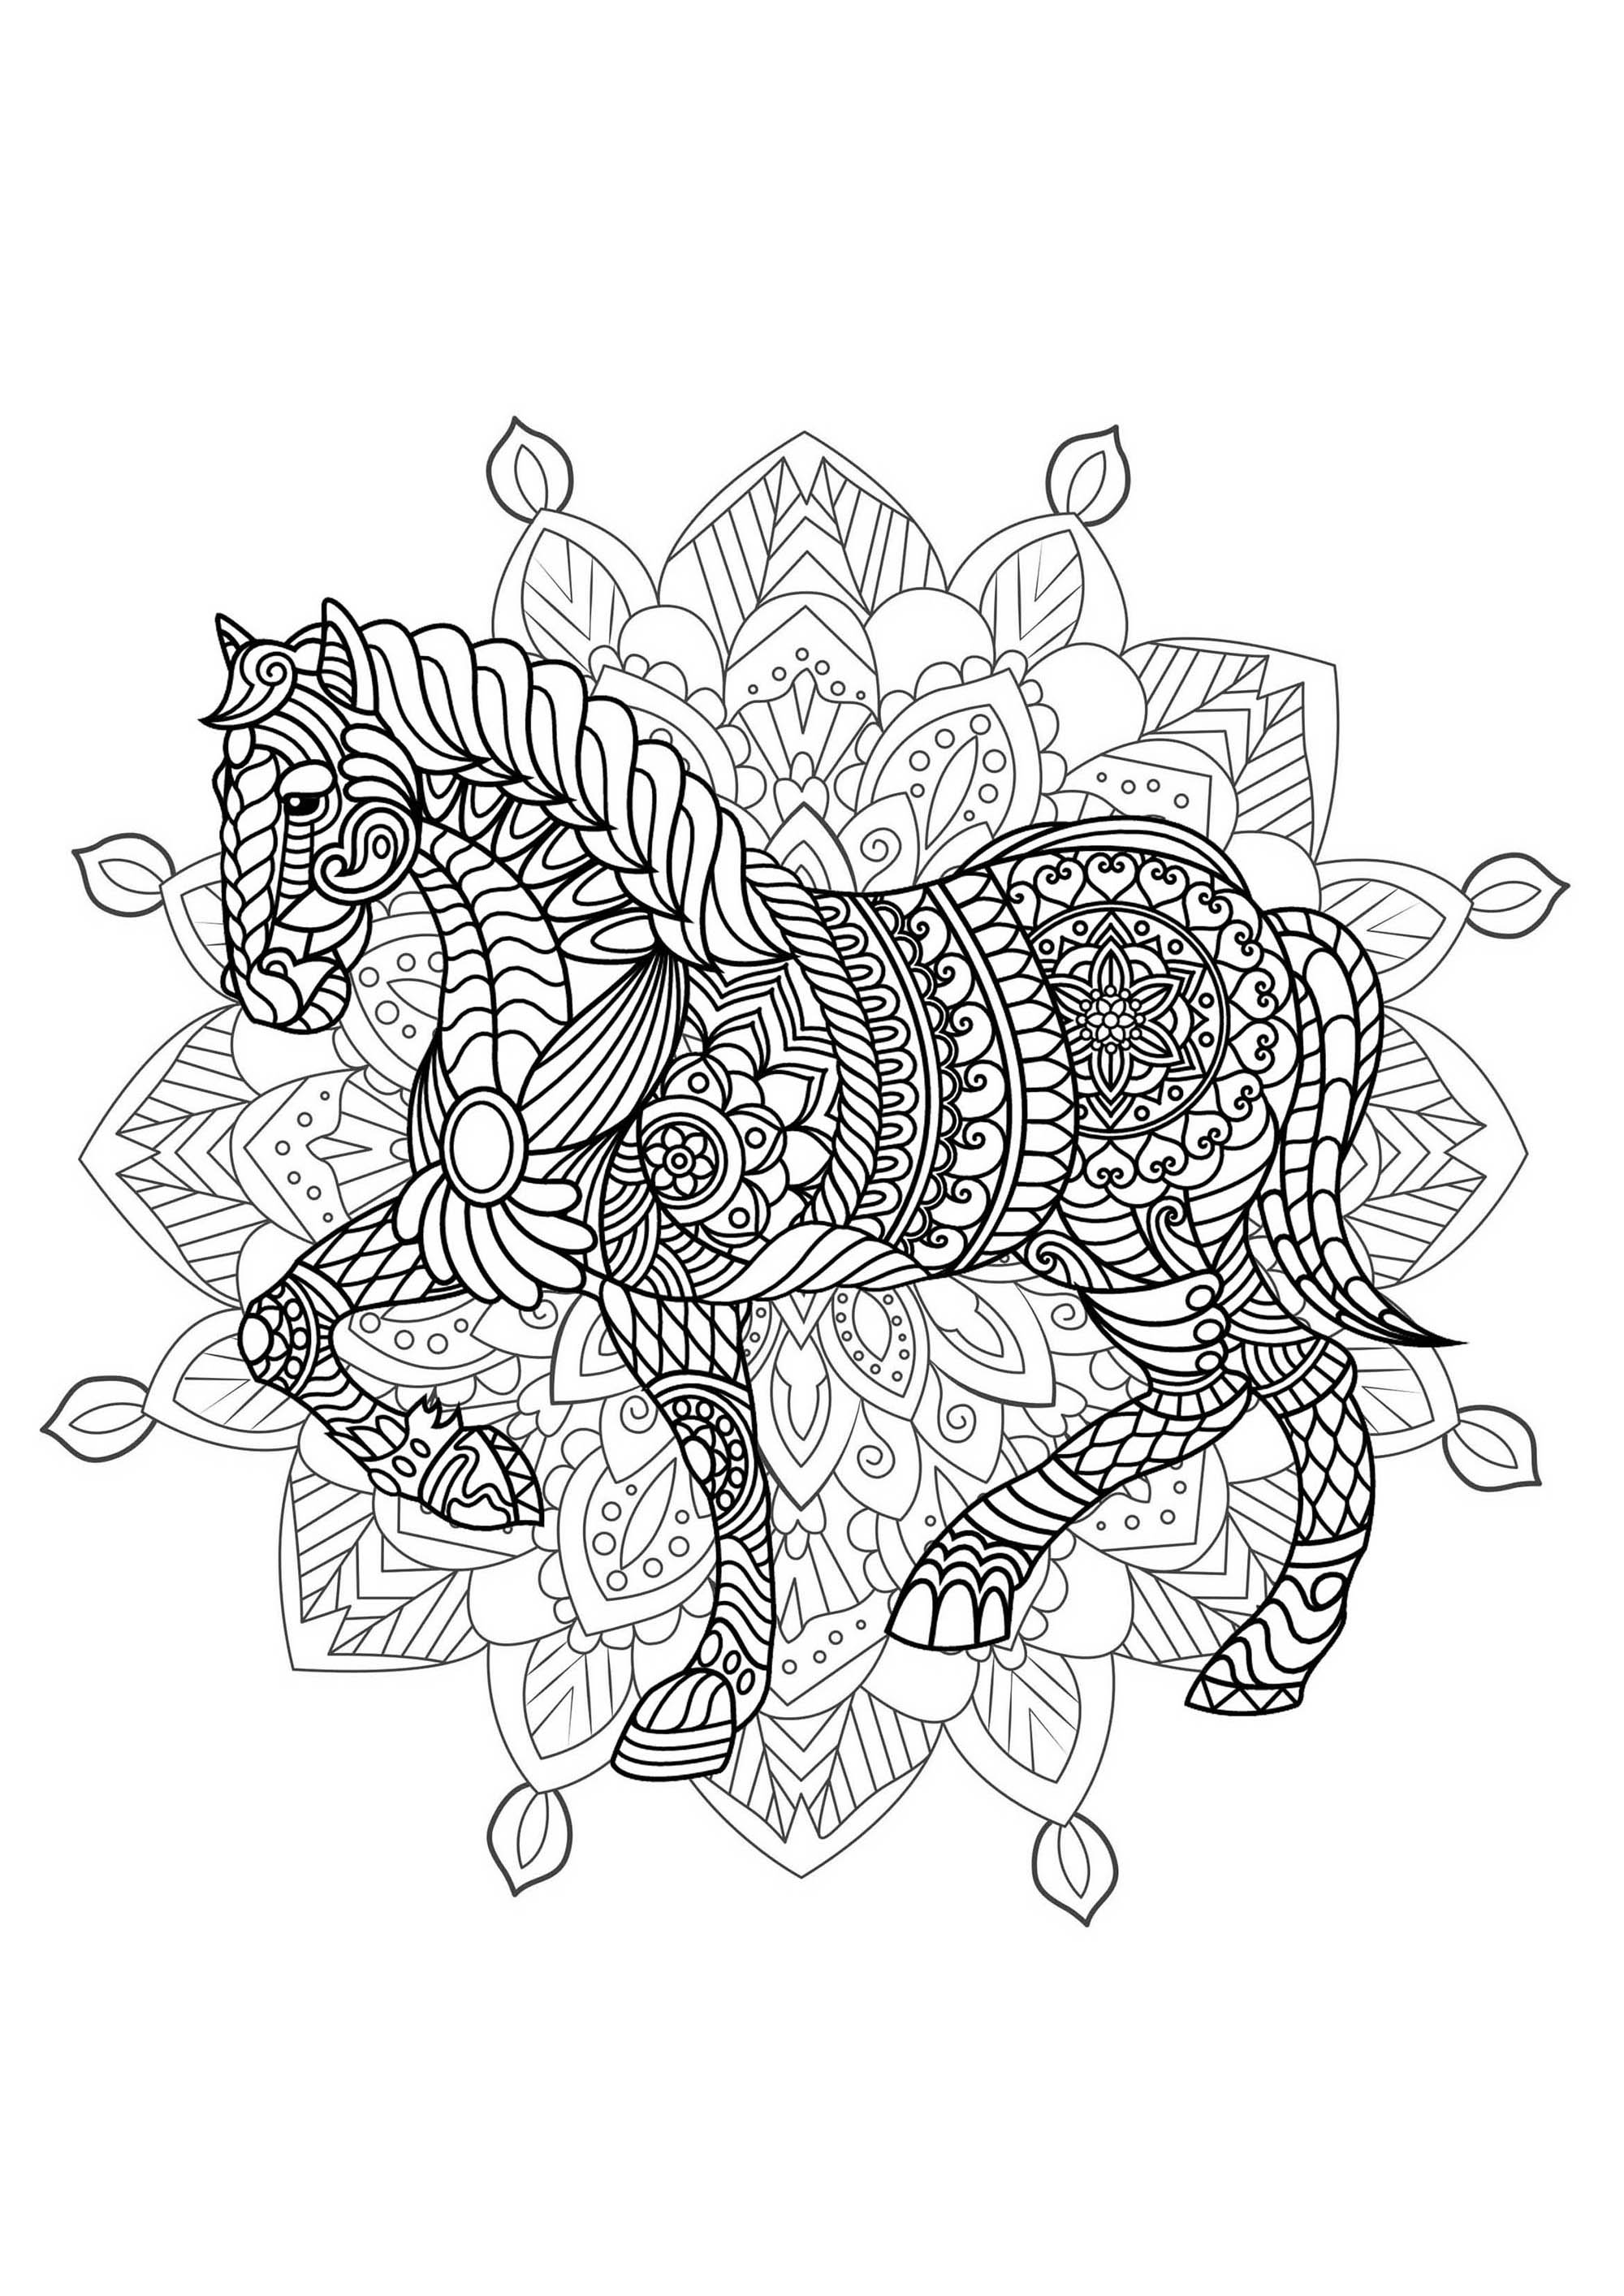 Horse integrated in a difficult Mandala. Many small details and little areas for a Mandala very original and harmonious. Do whatever it takes to get rid of any distractions that may interfere with your coloring.